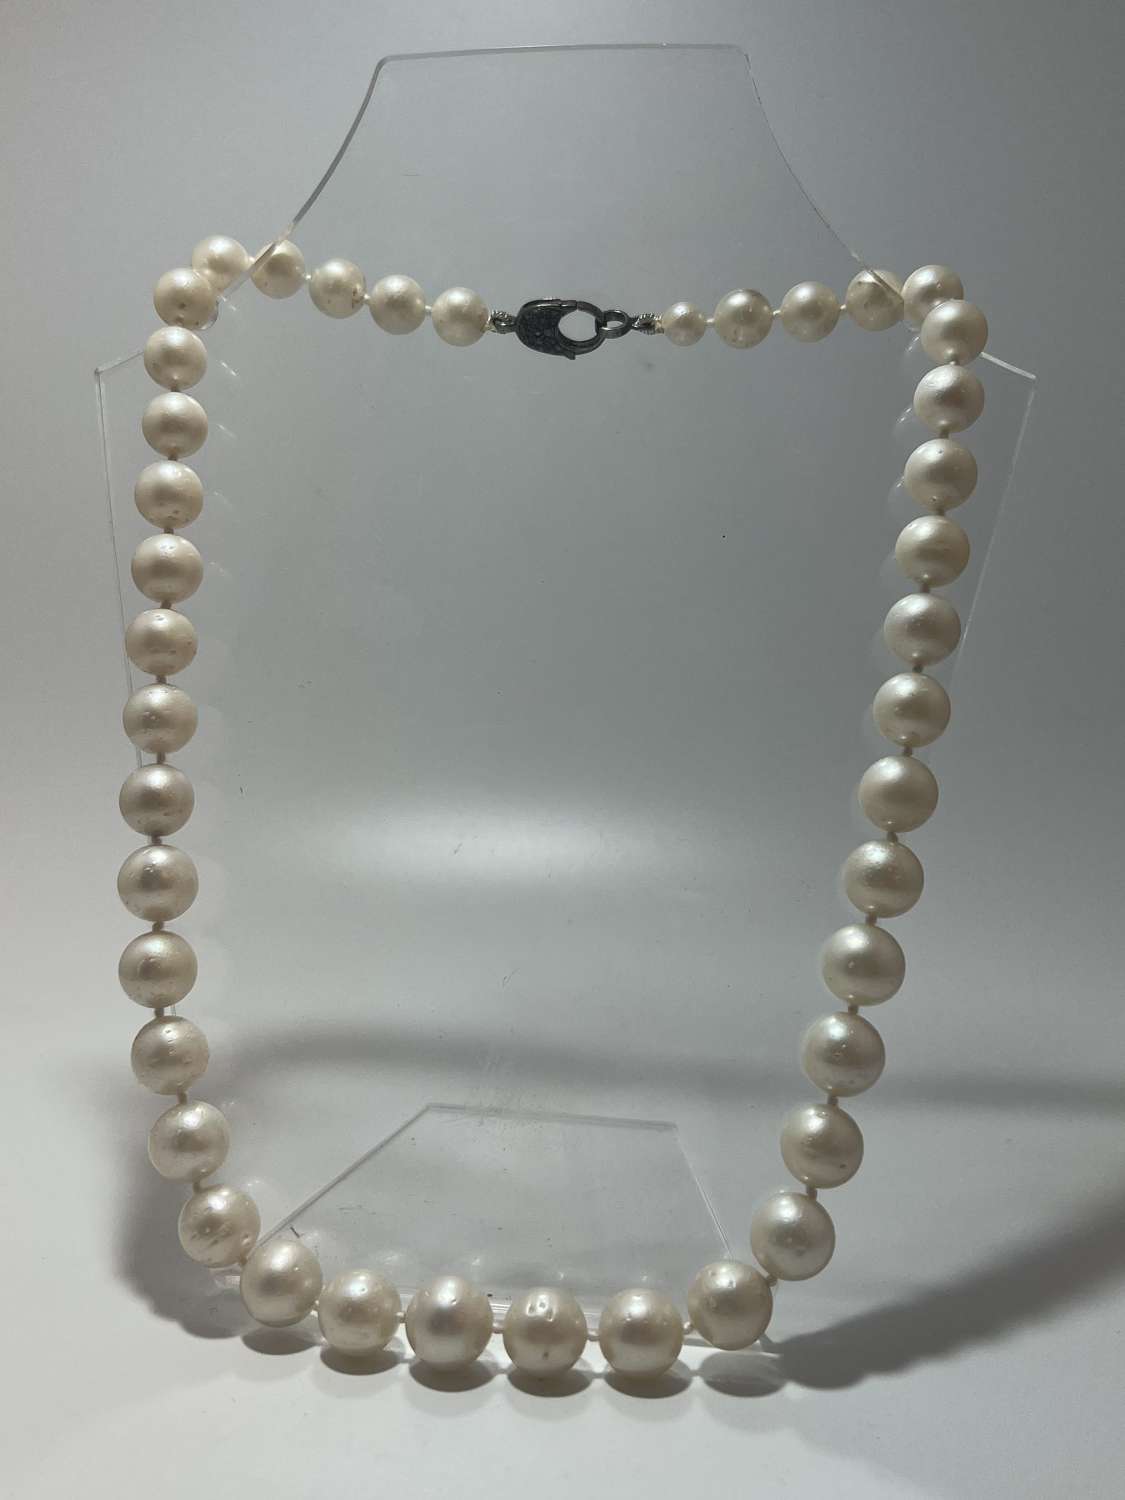 A fine Southsea Pearl necklace